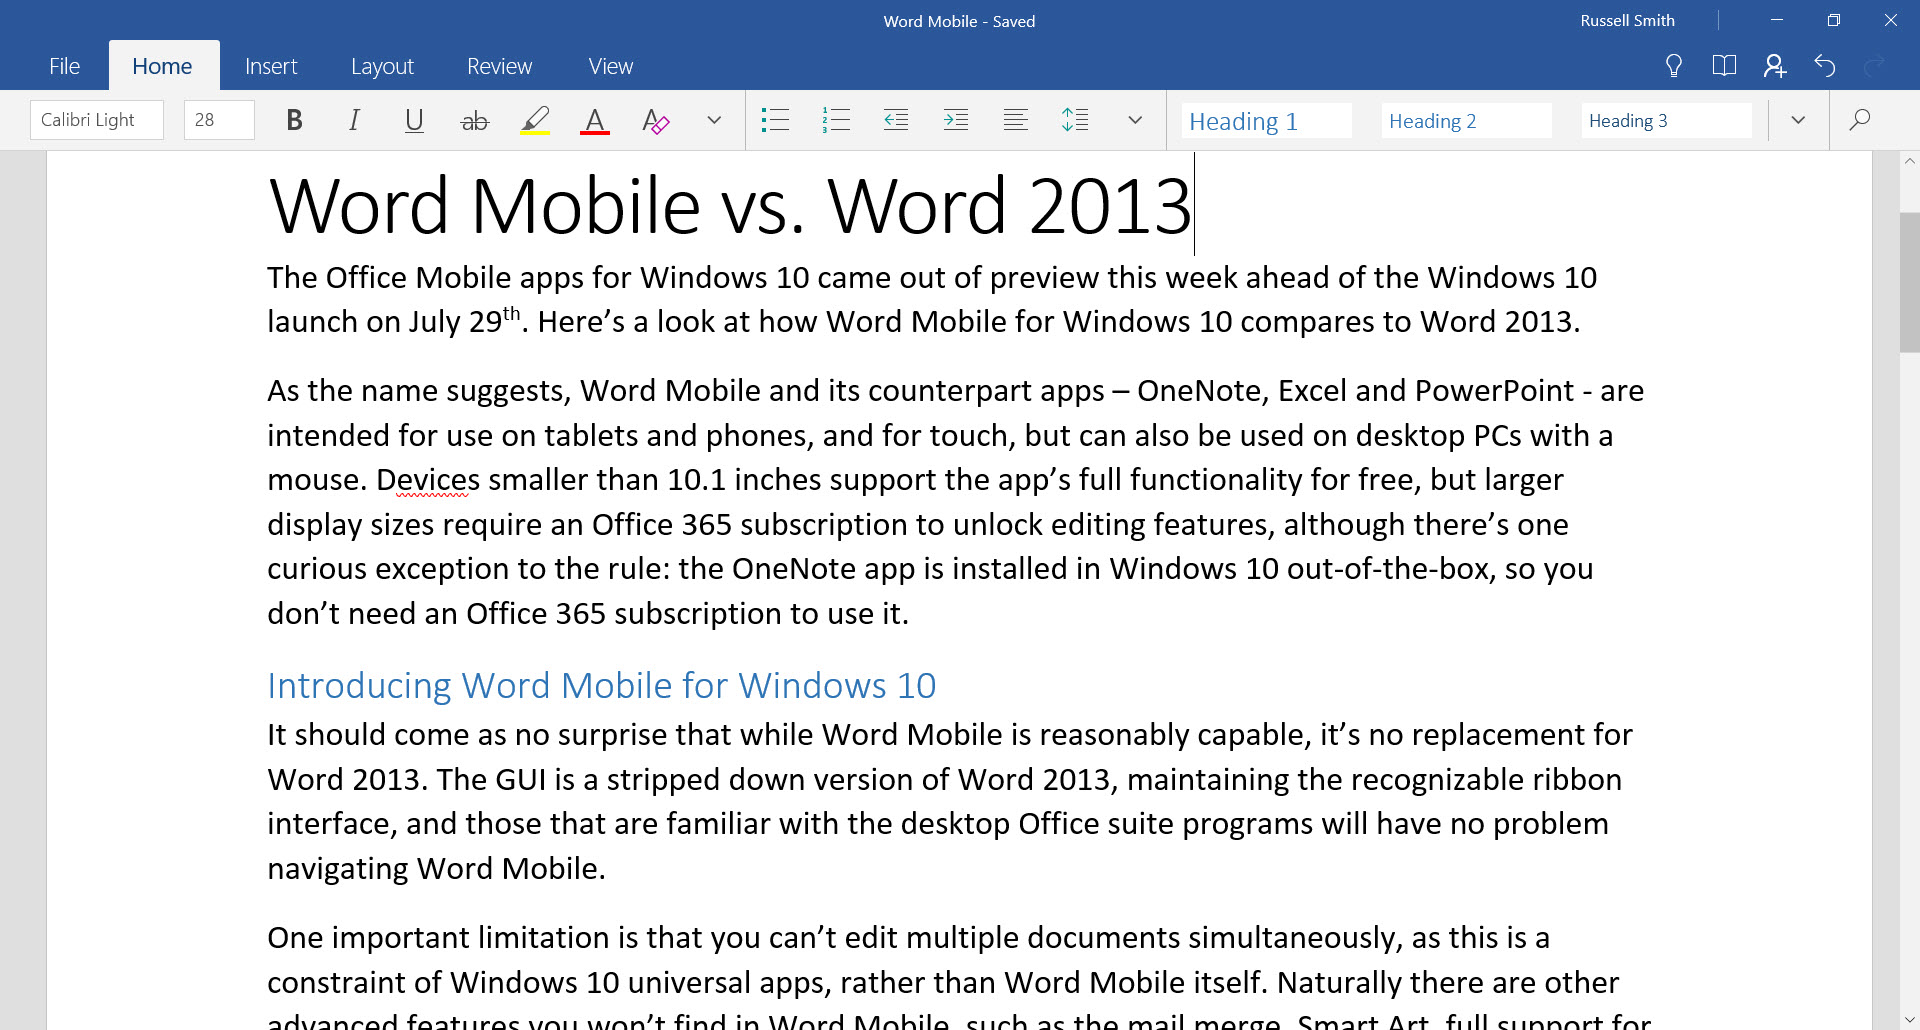 The Word Mobile interface on Windows 10 (Image Credit: Russell Smith)